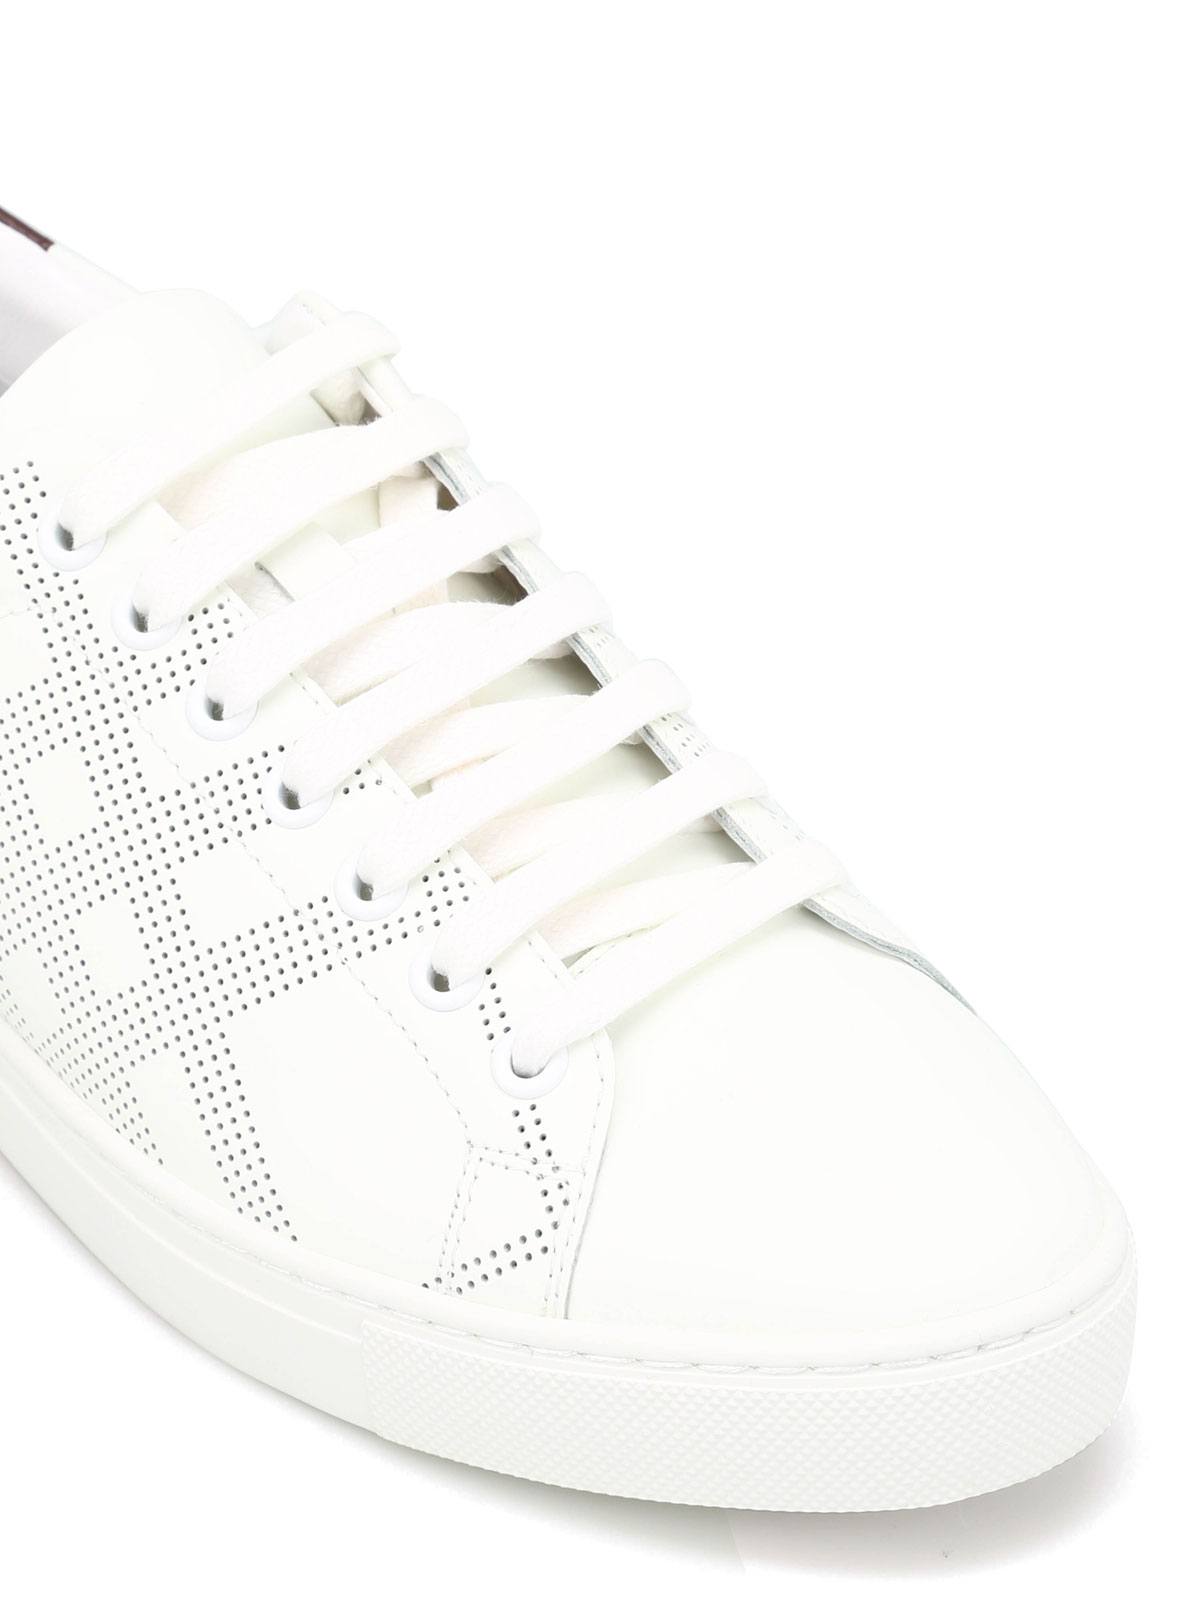 Trainers Burberry - Perforated leather sneakers - 4038157 